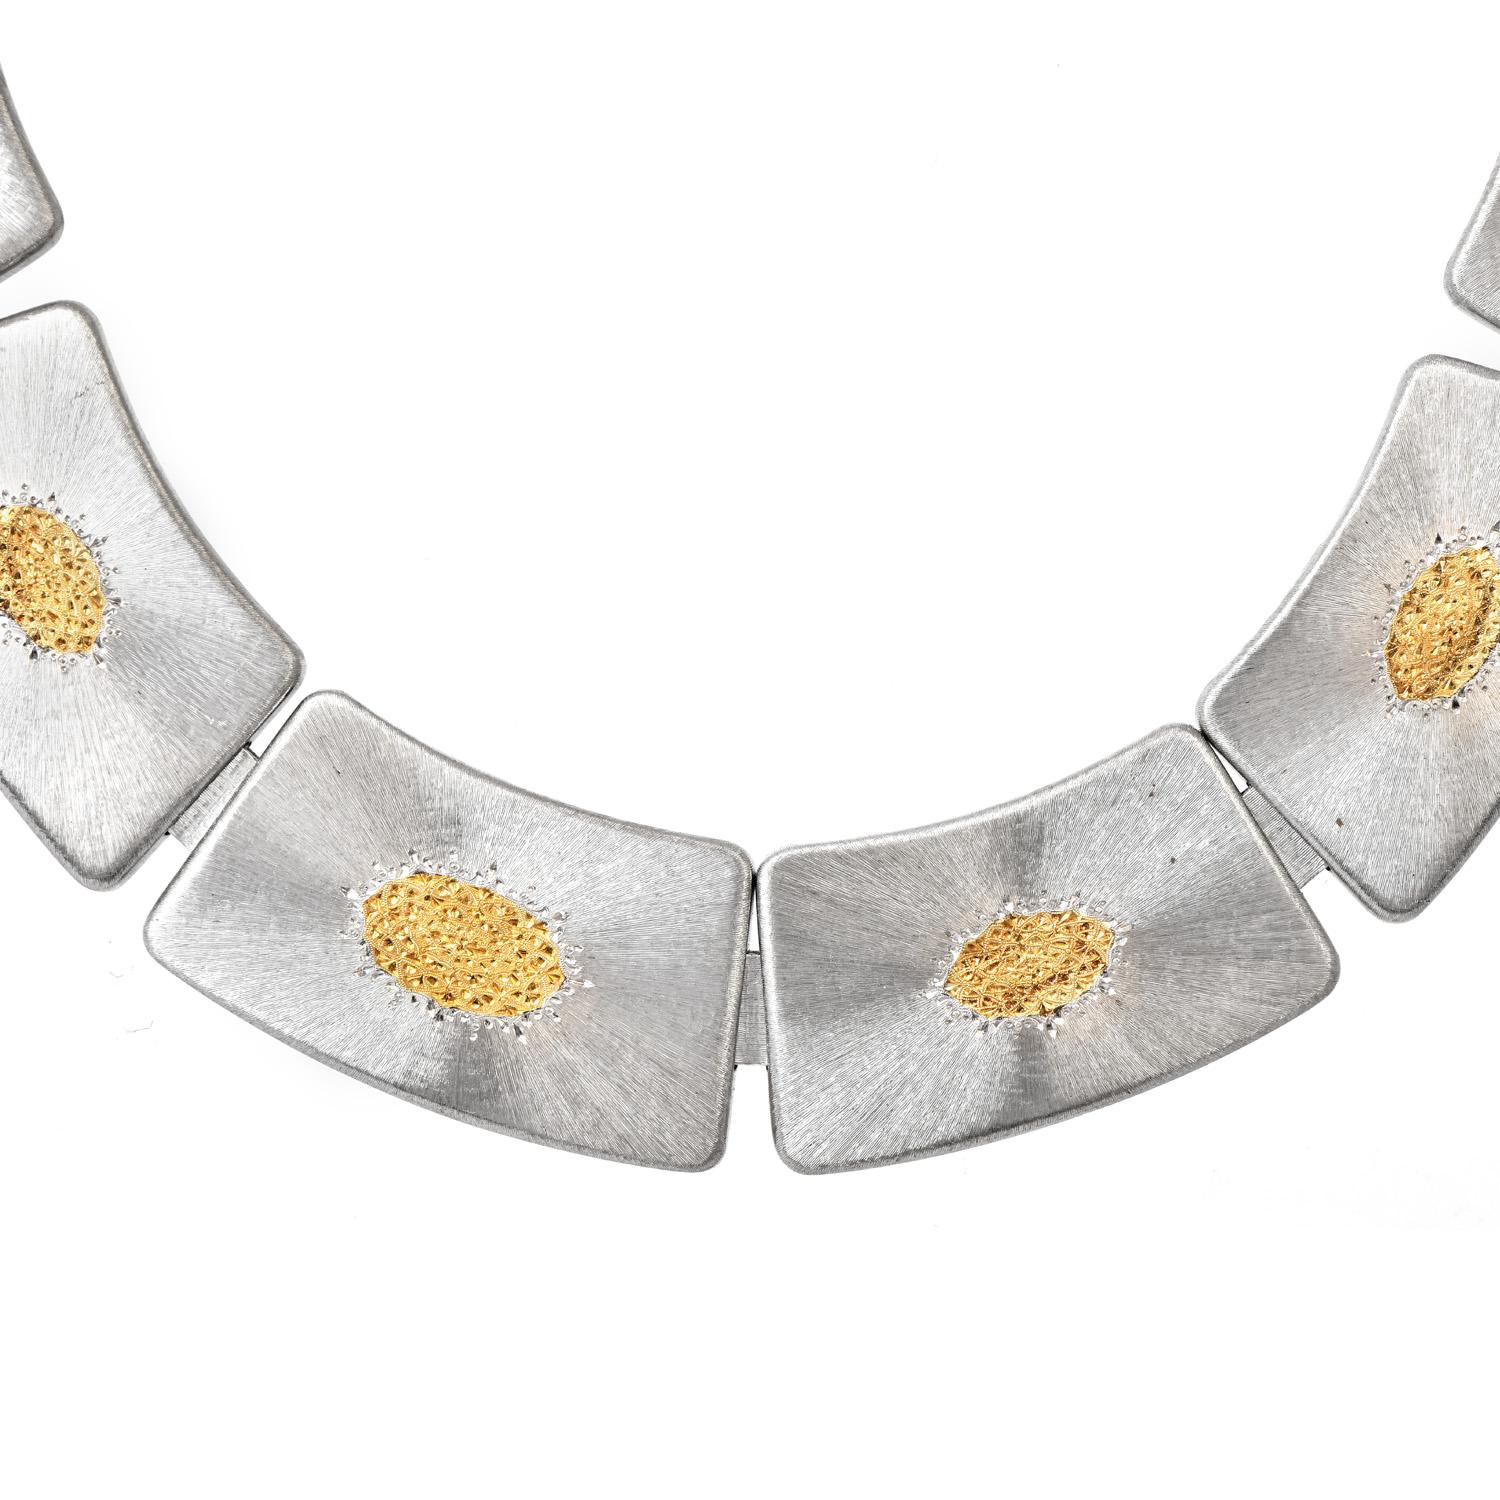 This graceful Buccellati Wide flat link necklace is crafted in a combination of silver and 18-karat yellow gold, weighing 88.3 grams.

composed of 14 silver rectangle links embellished by a solid 18k yellow gold, hand engraving in 